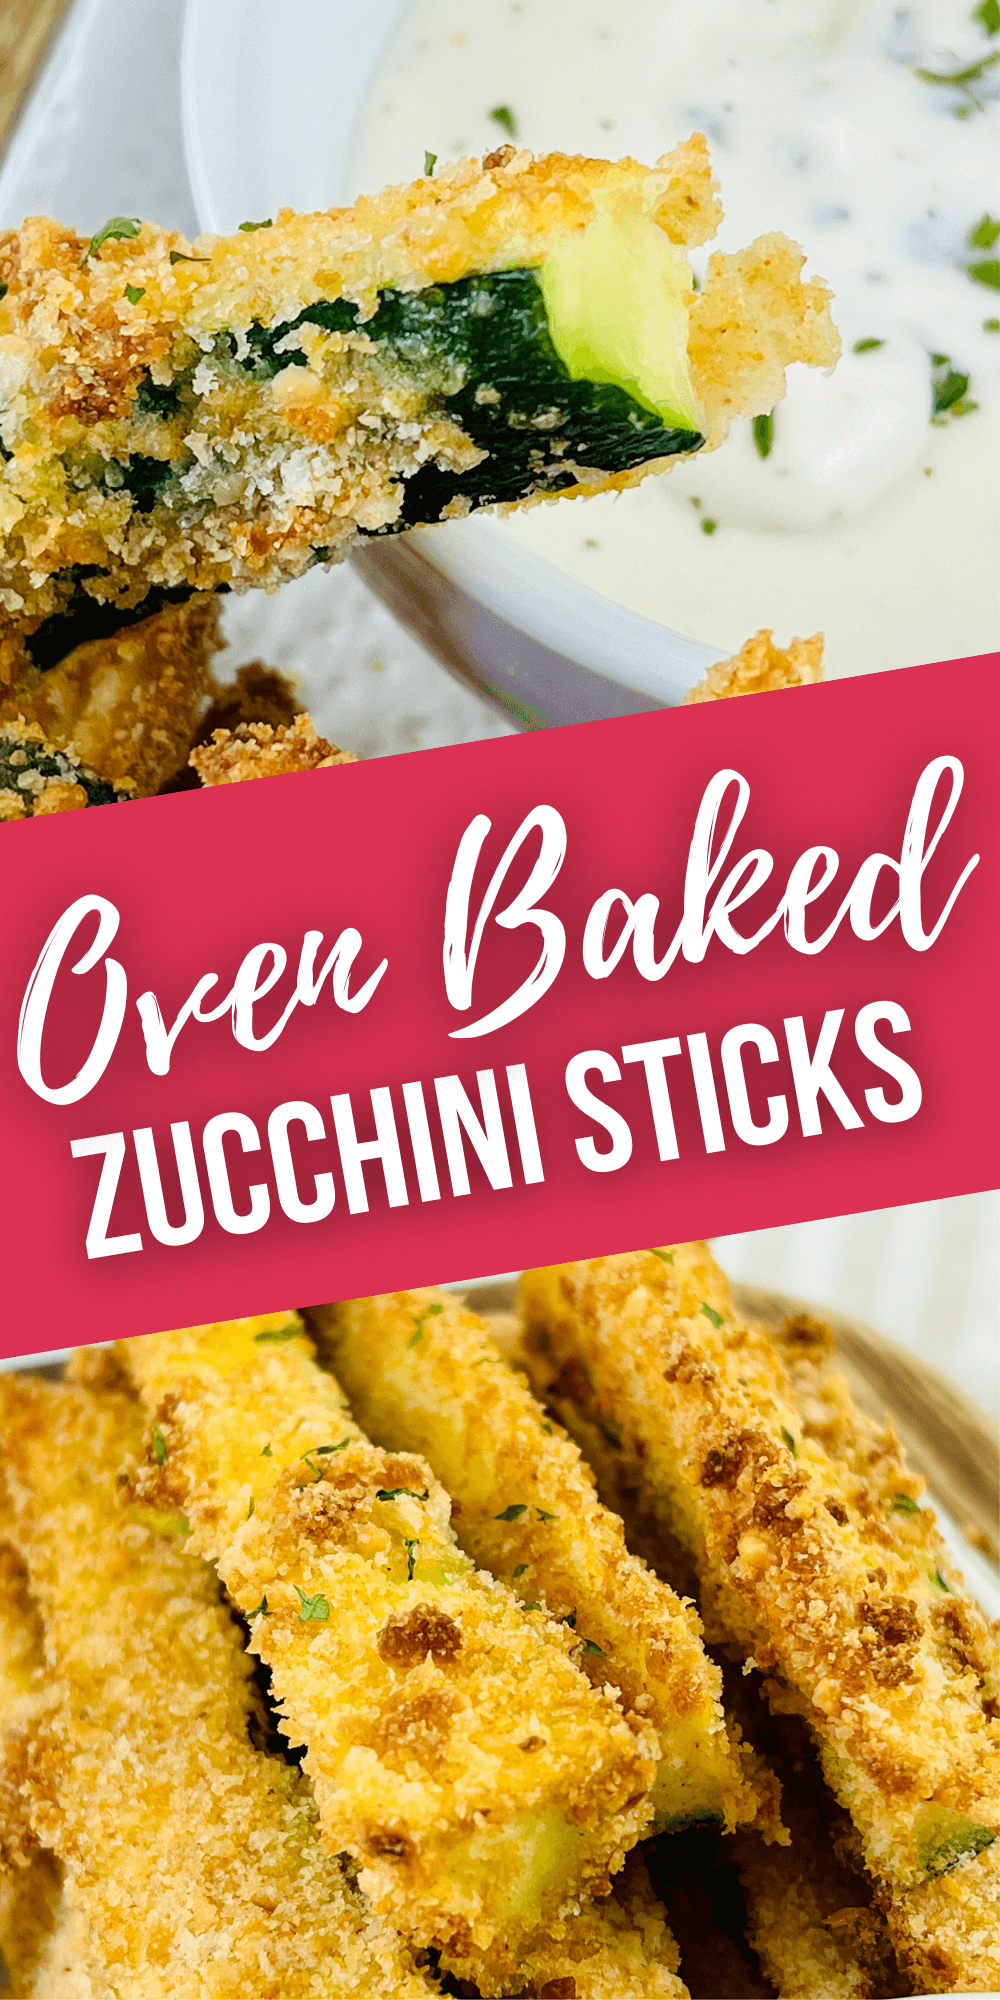 Oven Baked Zucchini Sticks - It Is a Keeper